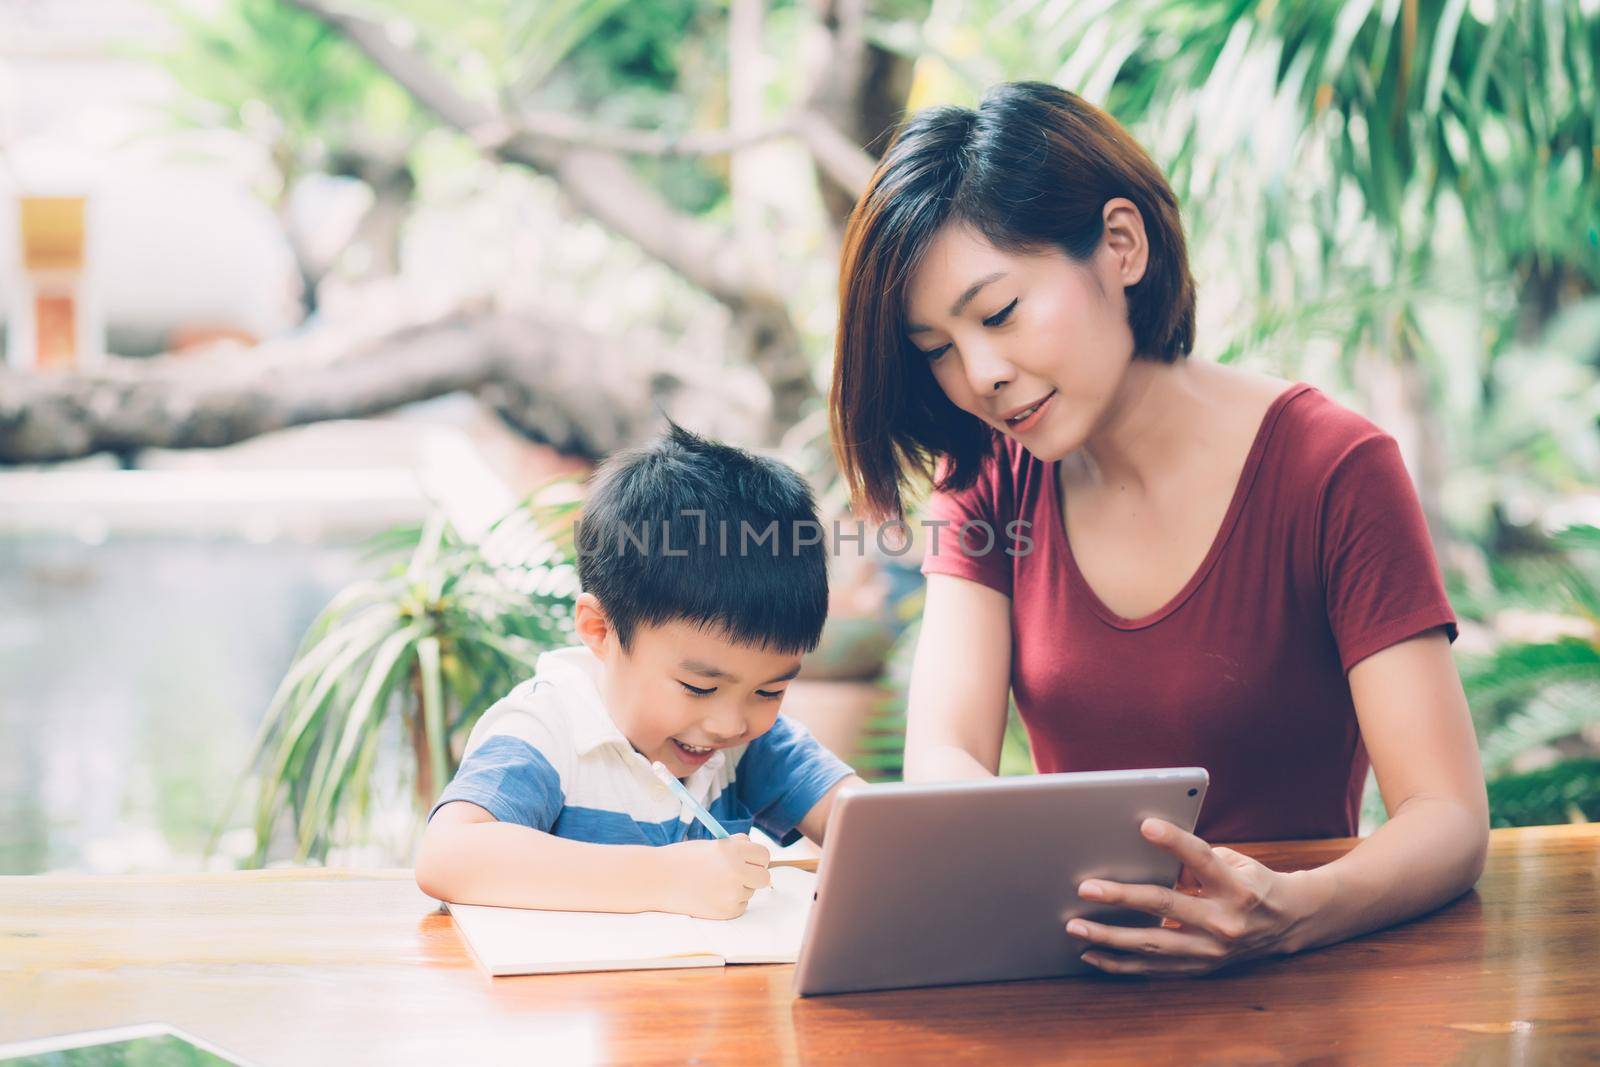 Son using digital tablet computer for study and learn to internet online with mother together, education from home, family recreation, mom teach boy and homework with technology, lifestyle concept.